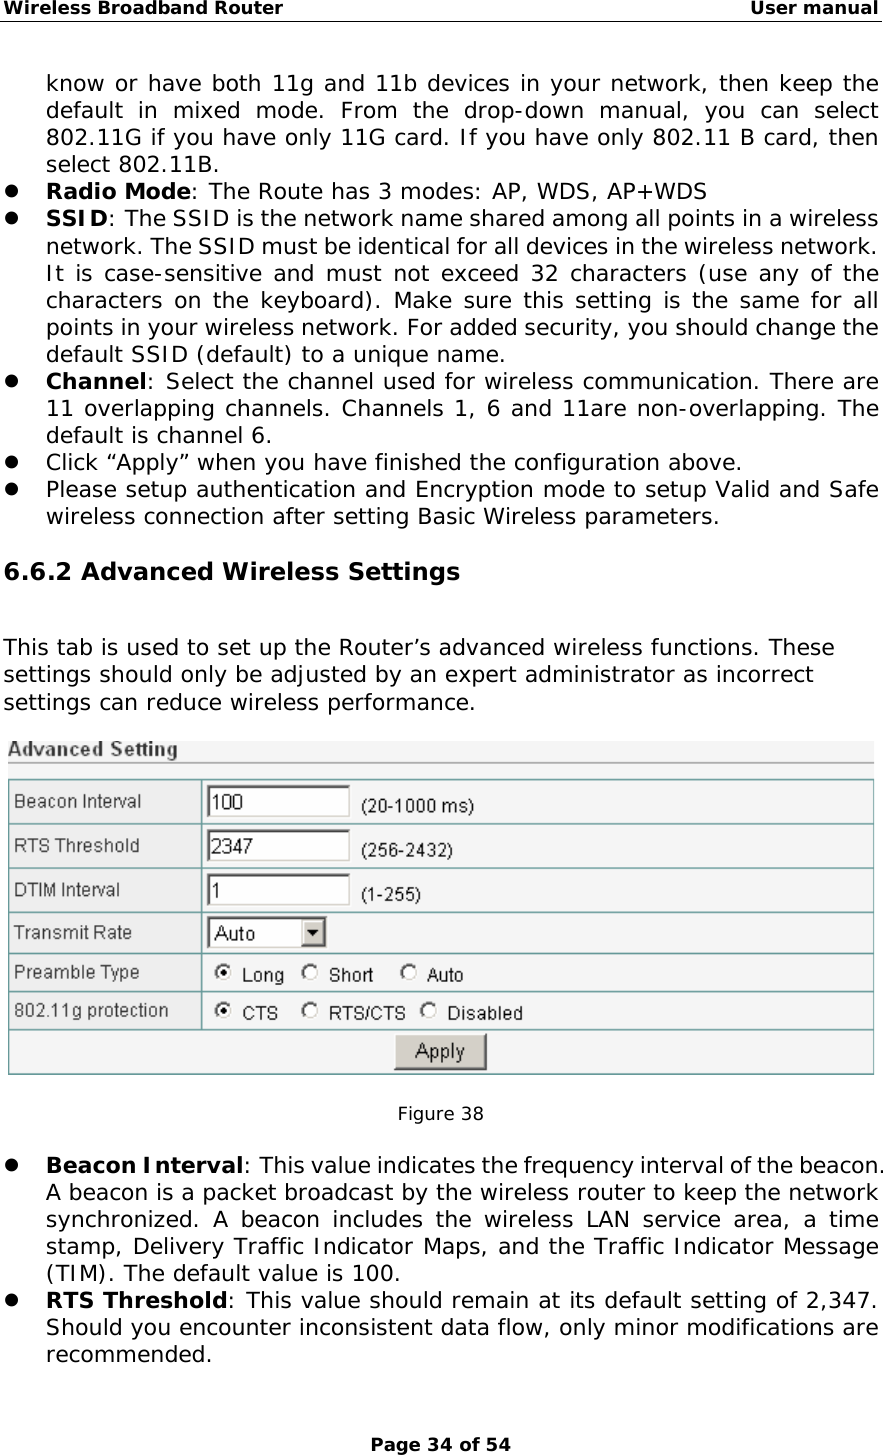 Wireless Broadband Router                                                   User manual Page 34 of 54 know or have both 11g and 11b devices in your network, then keep the default in mixed mode. From the drop-down manual, you can select 802.11G if you have only 11G card. If you have only 802.11 B card, then select 802.11B. z Radio Mode: The Route has 3 modes: AP, WDS, AP+WDS z SSID: The SSID is the network name shared among all points in a wireless network. The SSID must be identical for all devices in the wireless network. It is case-sensitive and must not exceed 32 characters (use any of the characters on the keyboard). Make sure this setting is the same for all points in your wireless network. For added security, you should change the default SSID (default) to a unique name. z Channel: Select the channel used for wireless communication. There are 11 overlapping channels. Channels 1, 6 and 11are non-overlapping. The default is channel 6.  z Click “Apply” when you have finished the configuration above. z Please setup authentication and Encryption mode to setup Valid and Safe wireless connection after setting Basic Wireless parameters. 6.6.2 Advanced Wireless Settings This tab is used to set up the Router’s advanced wireless functions. These settings should only be adjusted by an expert administrator as incorrect settings can reduce wireless performance.    Figure 38  z Beacon Interval: This value indicates the frequency interval of the beacon. A beacon is a packet broadcast by the wireless router to keep the network synchronized. A beacon includes the wireless LAN service area, a time stamp, Delivery Traffic Indicator Maps, and the Traffic Indicator Message (TIM). The default value is 100. z RTS Threshold: This value should remain at its default setting of 2,347. Should you encounter inconsistent data flow, only minor modifications are recommended. 